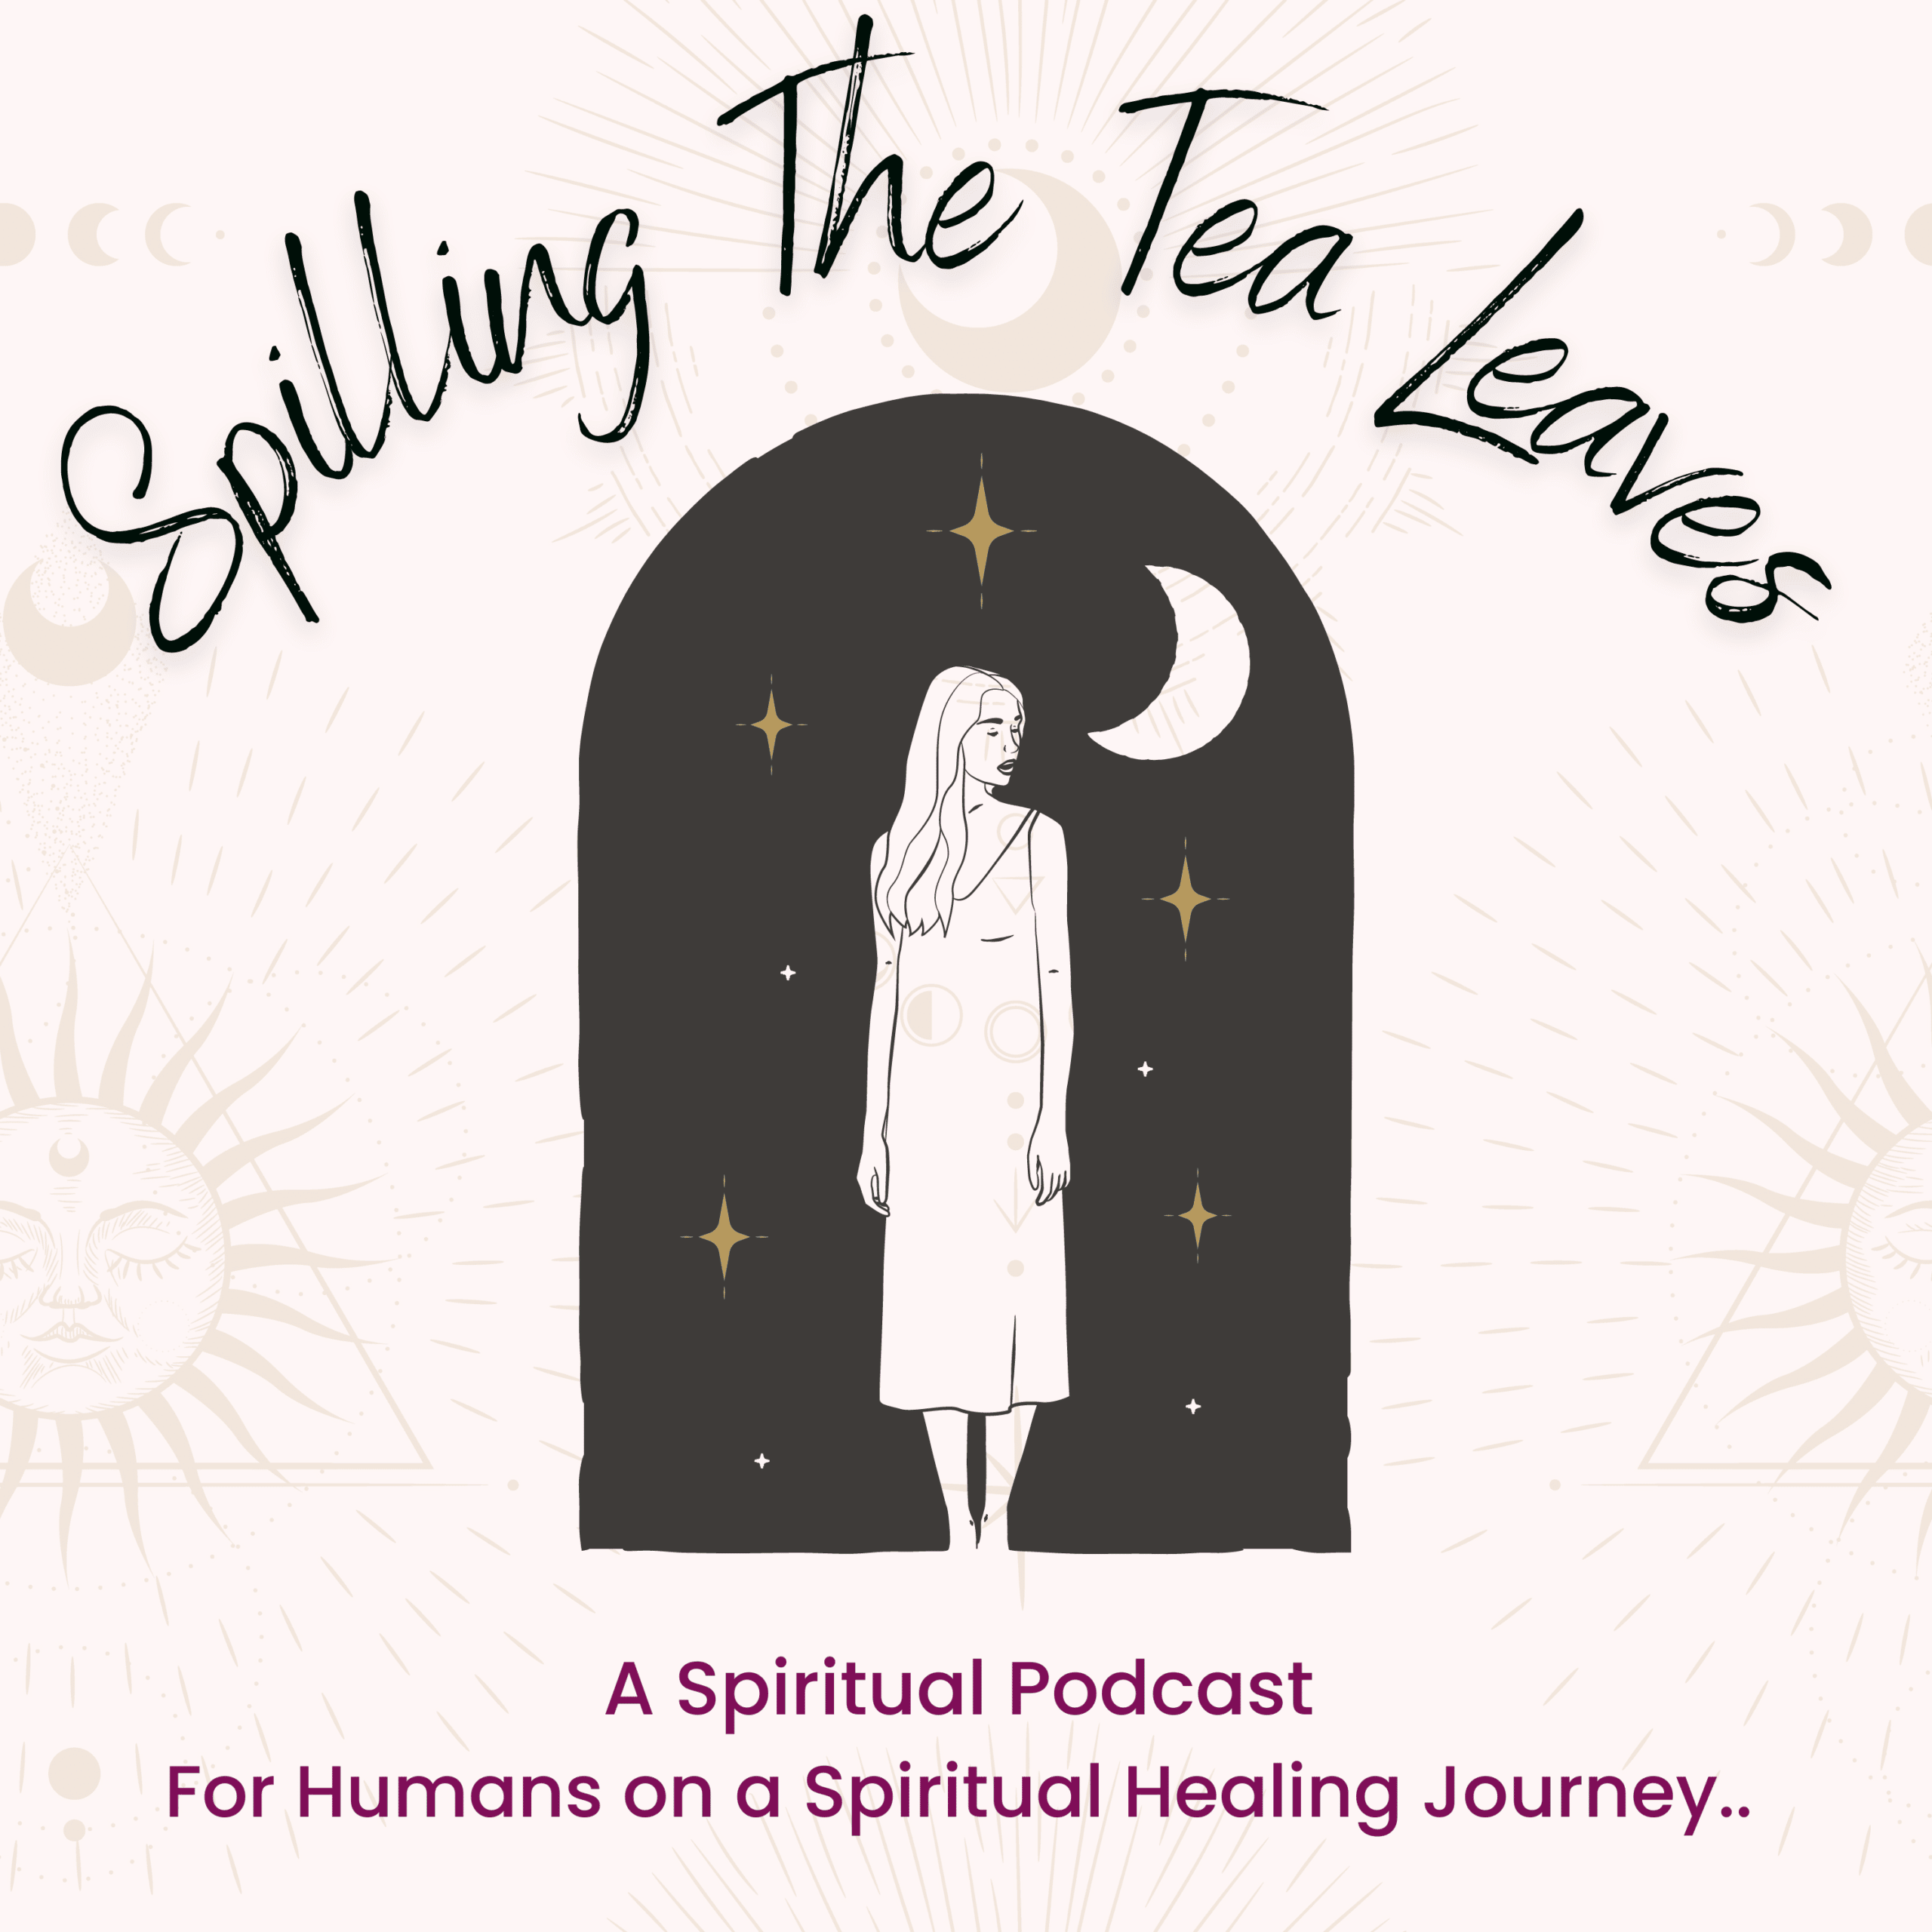 Spilling The Tea Leaves Podcast cover. Woman looking over her shoulder towards the moon.